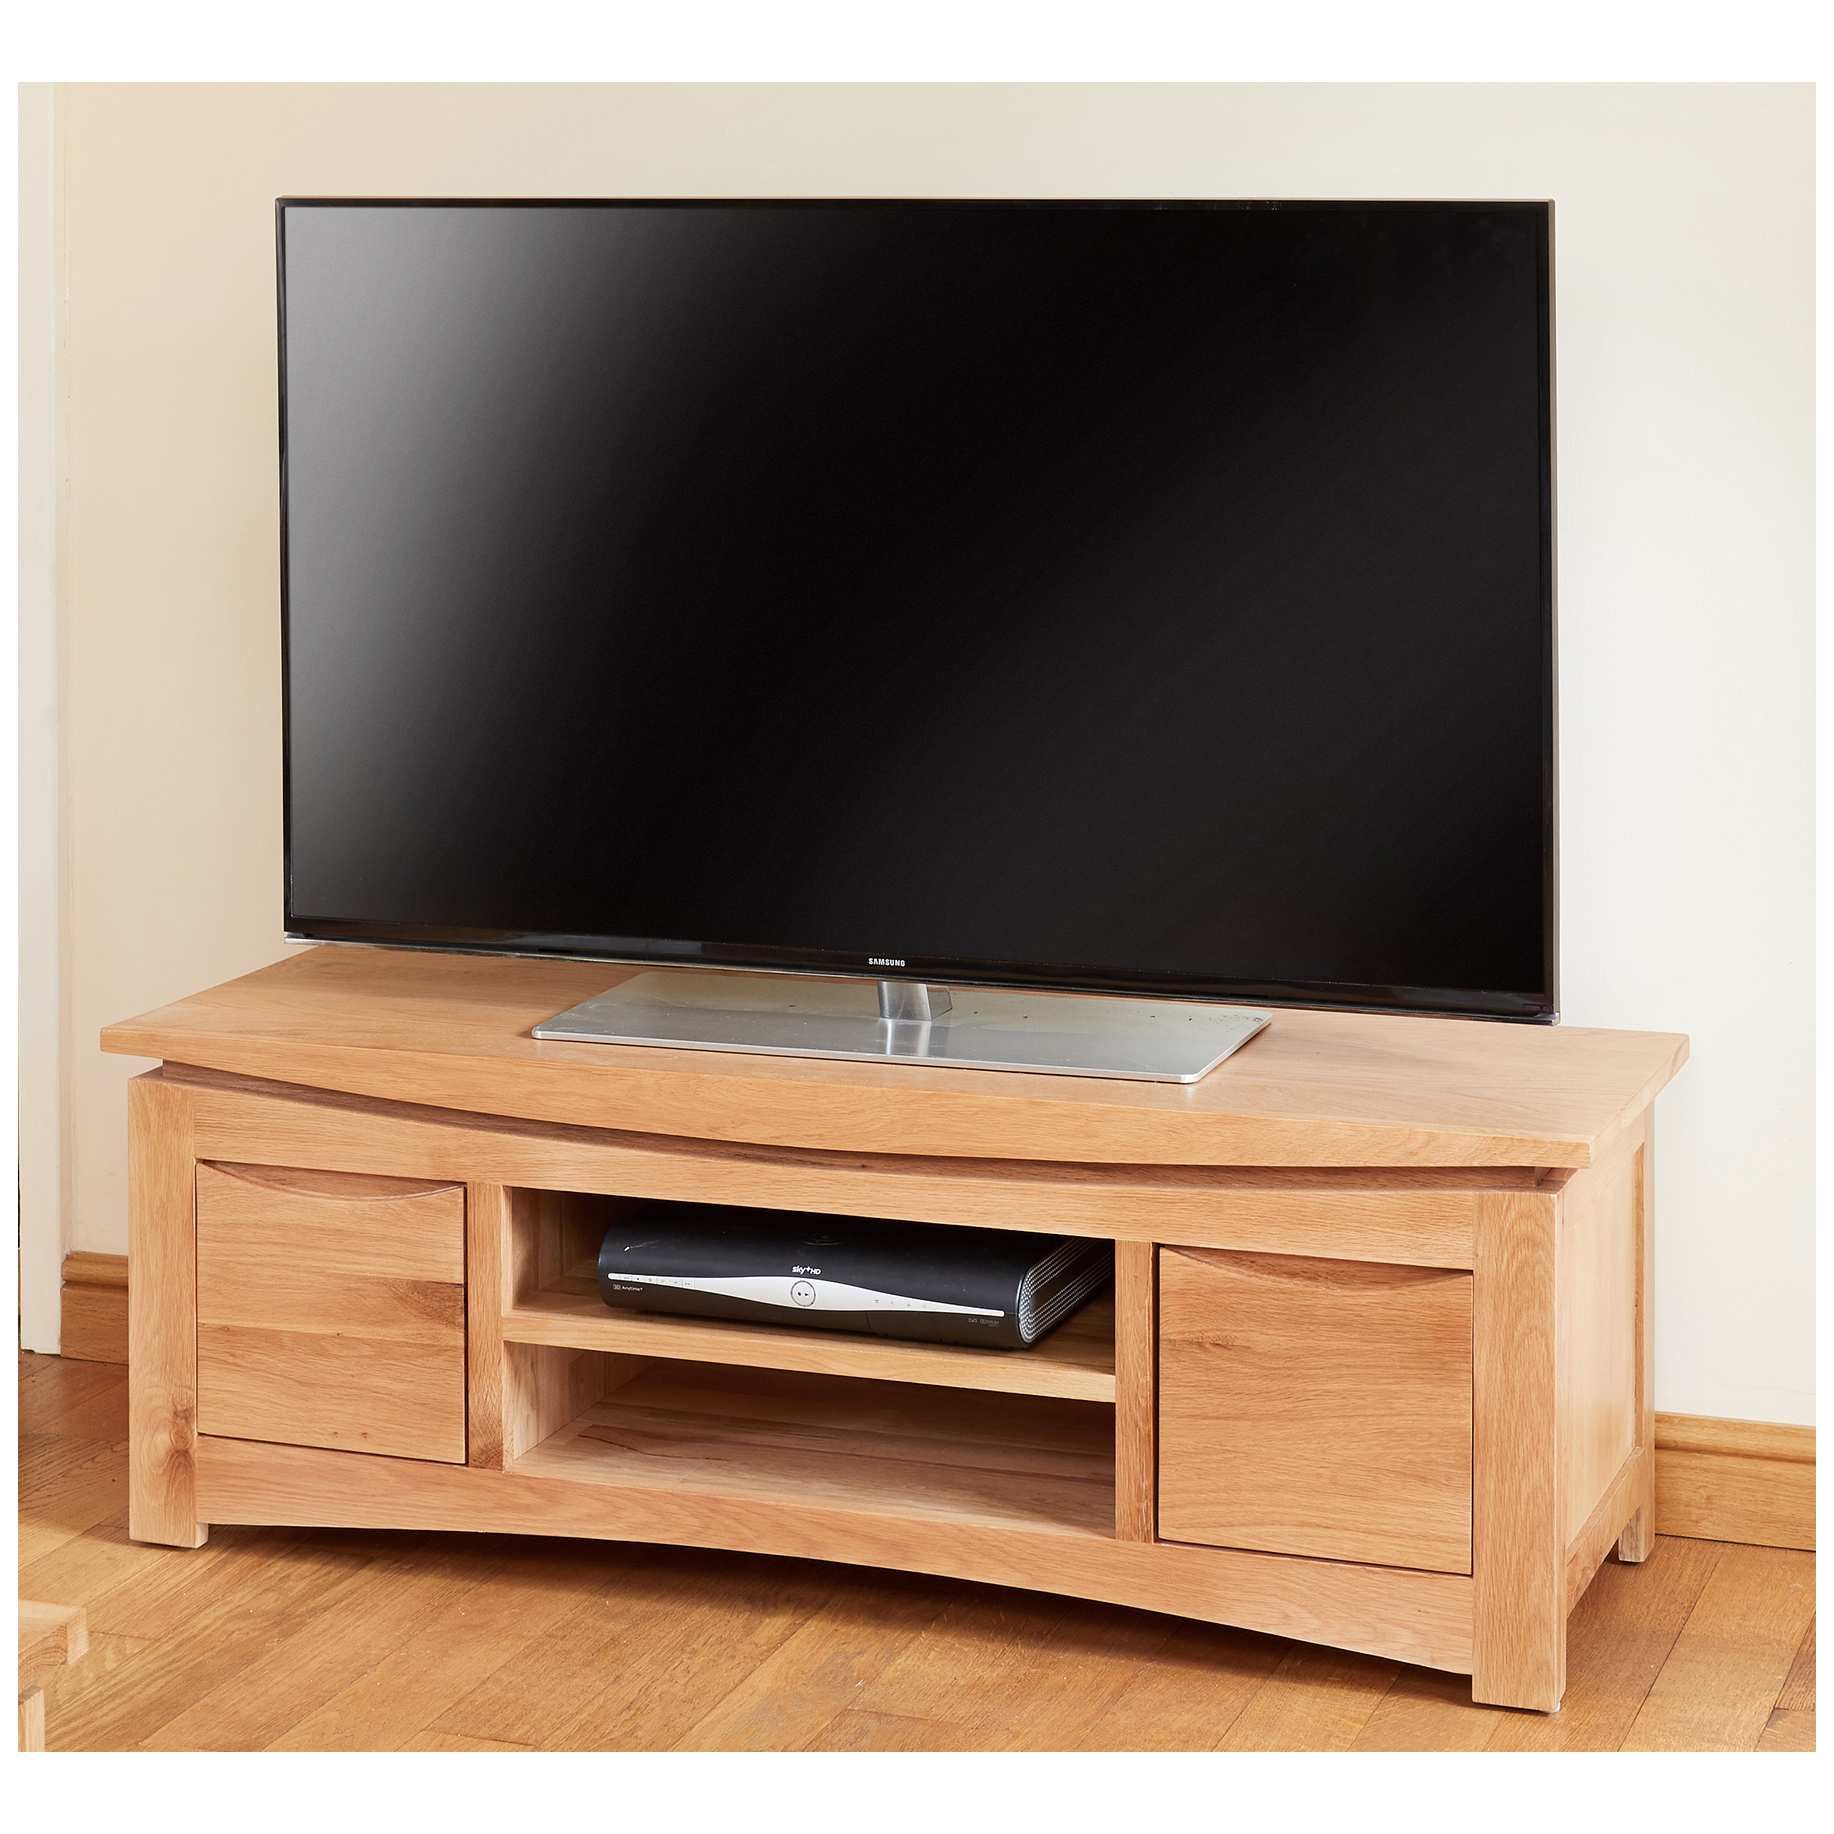 Addison Solid Oak Widescreen Television Cabinet | Free Uk In Oak Widescreen Tv Unit (View 2 of 15)